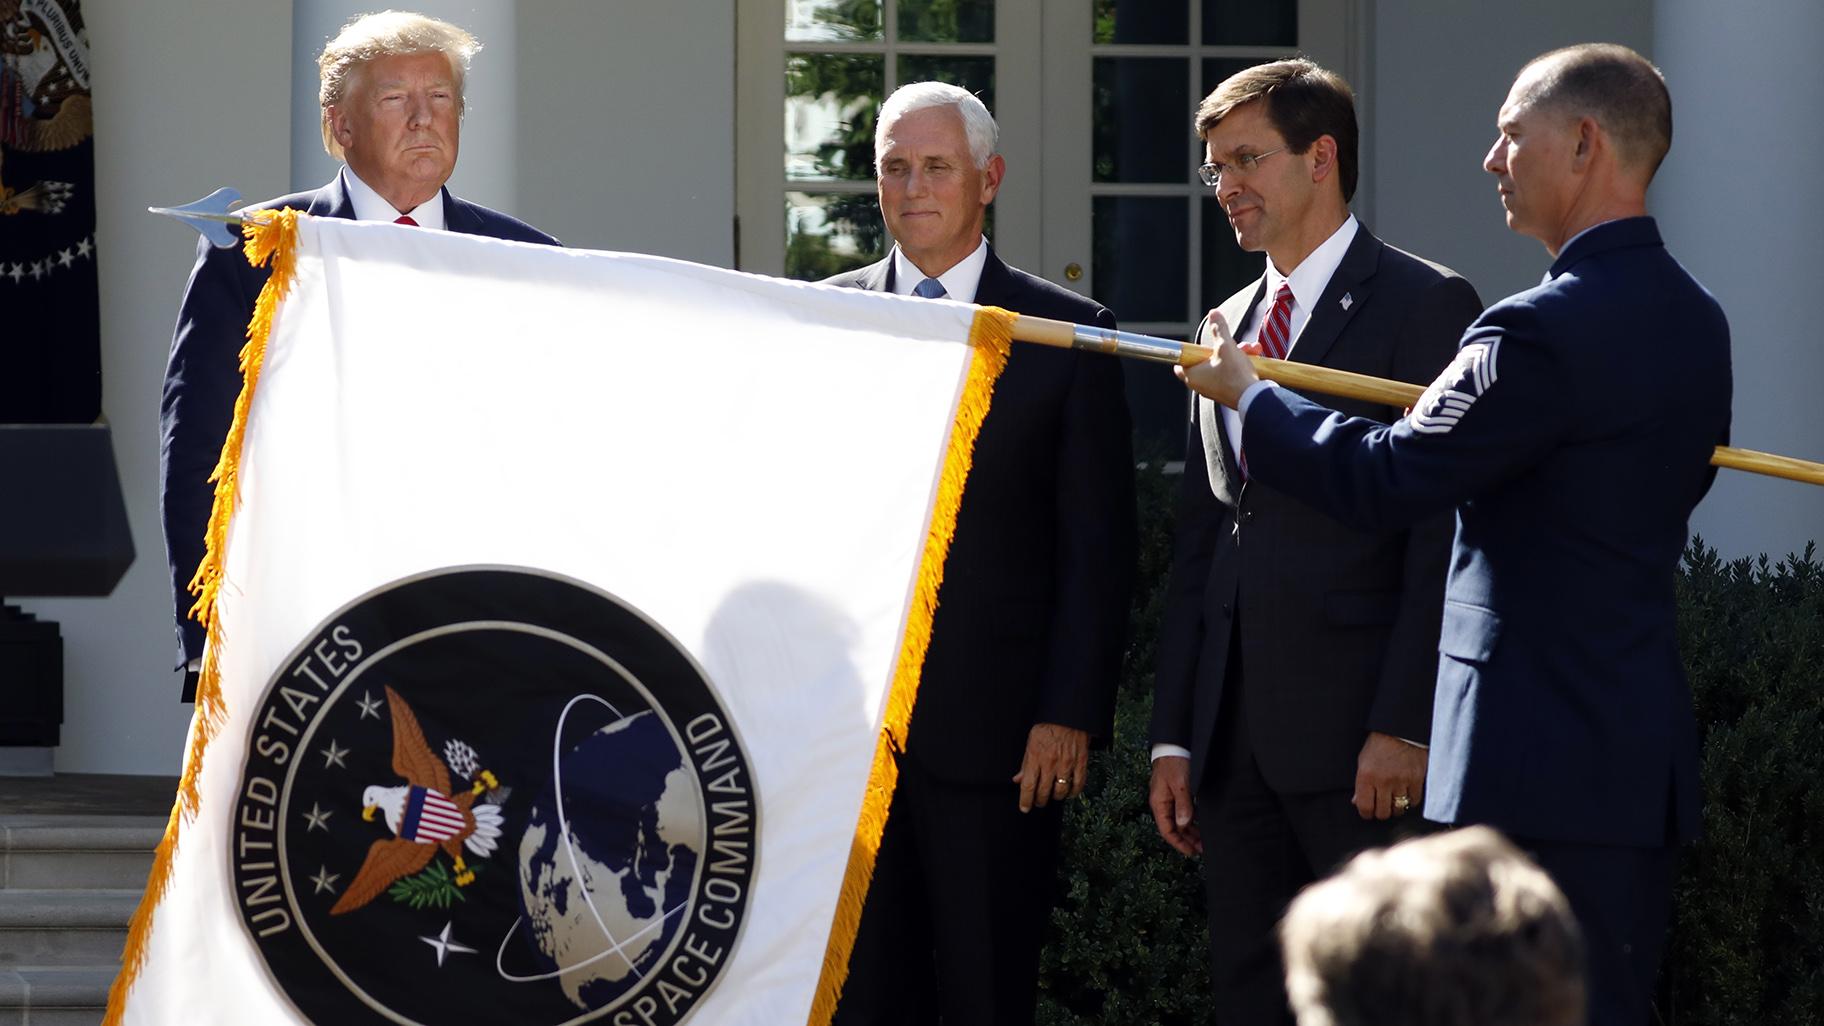 President Donald Trump watches with Vice President Mike Pence and Defense Secretary Mark Esper as the flag for U.S. Space Command is unfurled in the Rose Garden of the White House in Washington, D.C., on Thursday, Aug. 29, 2019. (AP Photo / Carolyn Kaster)